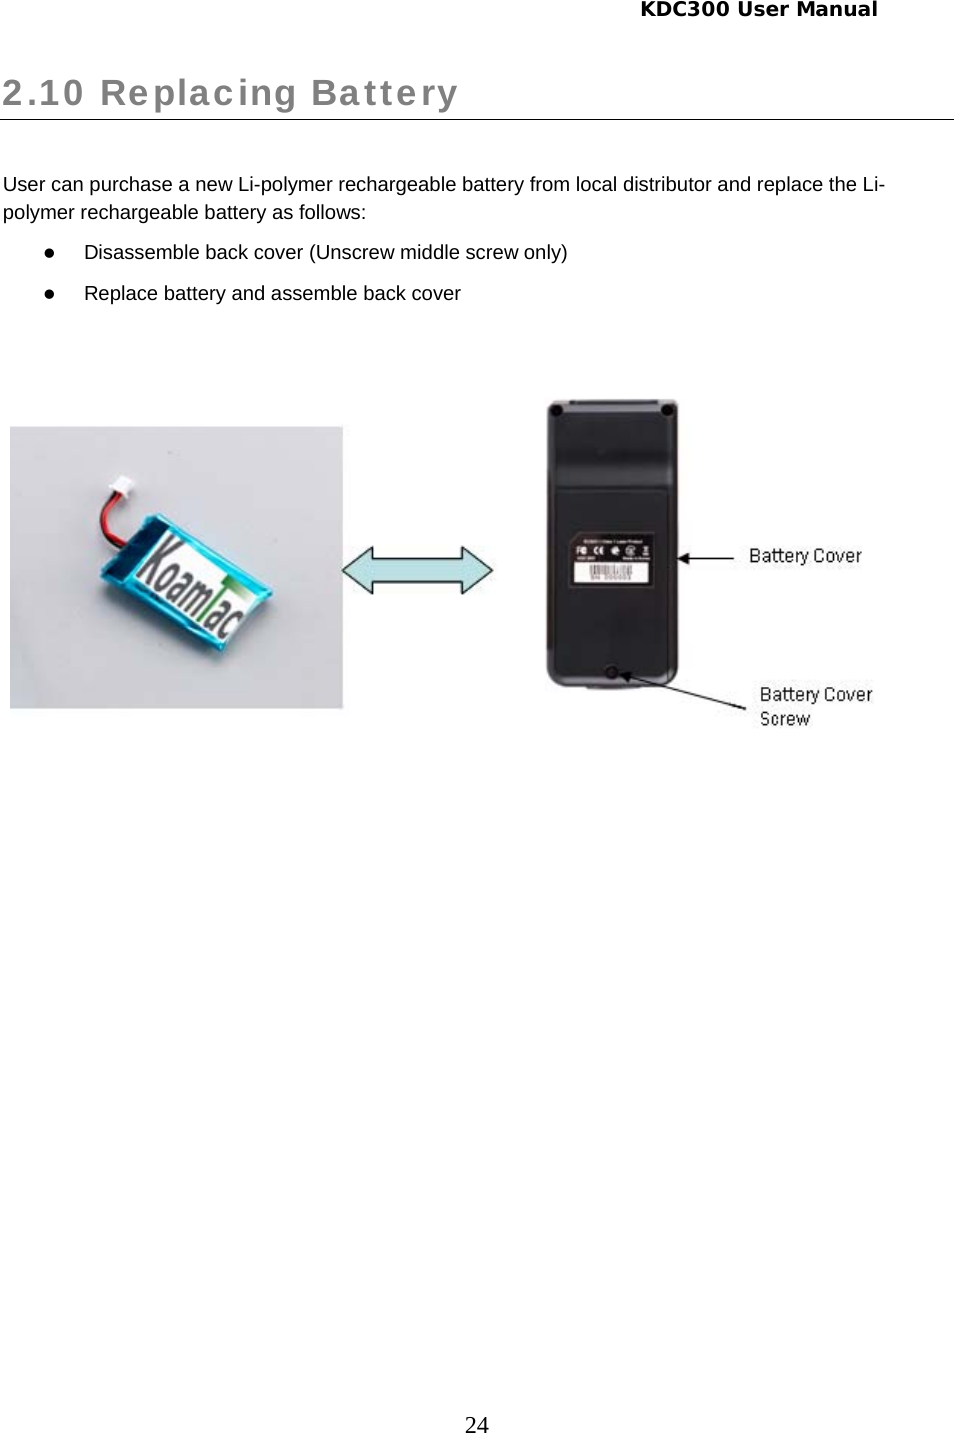     KDC300 User Manual 24 2.10 Replacing Battery   User can purchase a new Li-polymer rechargeable battery from local distributor and replace the Li-polymer rechargeable battery as follows: z Disassemble back cover (Unscrew middle screw only) z Replace battery and assemble back cover       